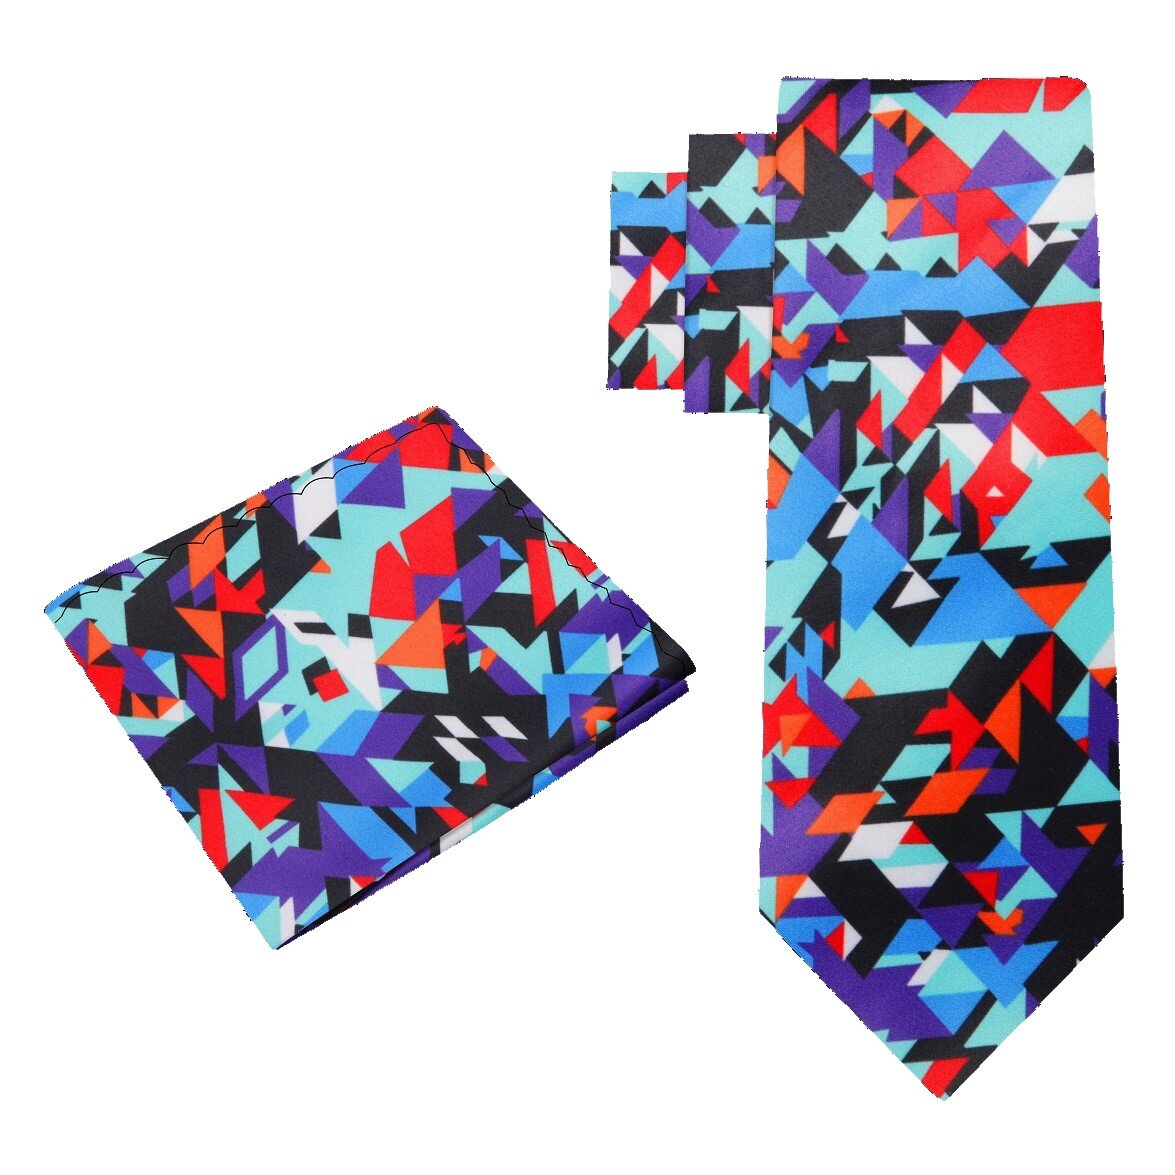 Alt View: Multi Color Abstract Shapes Tie and Pocket Square